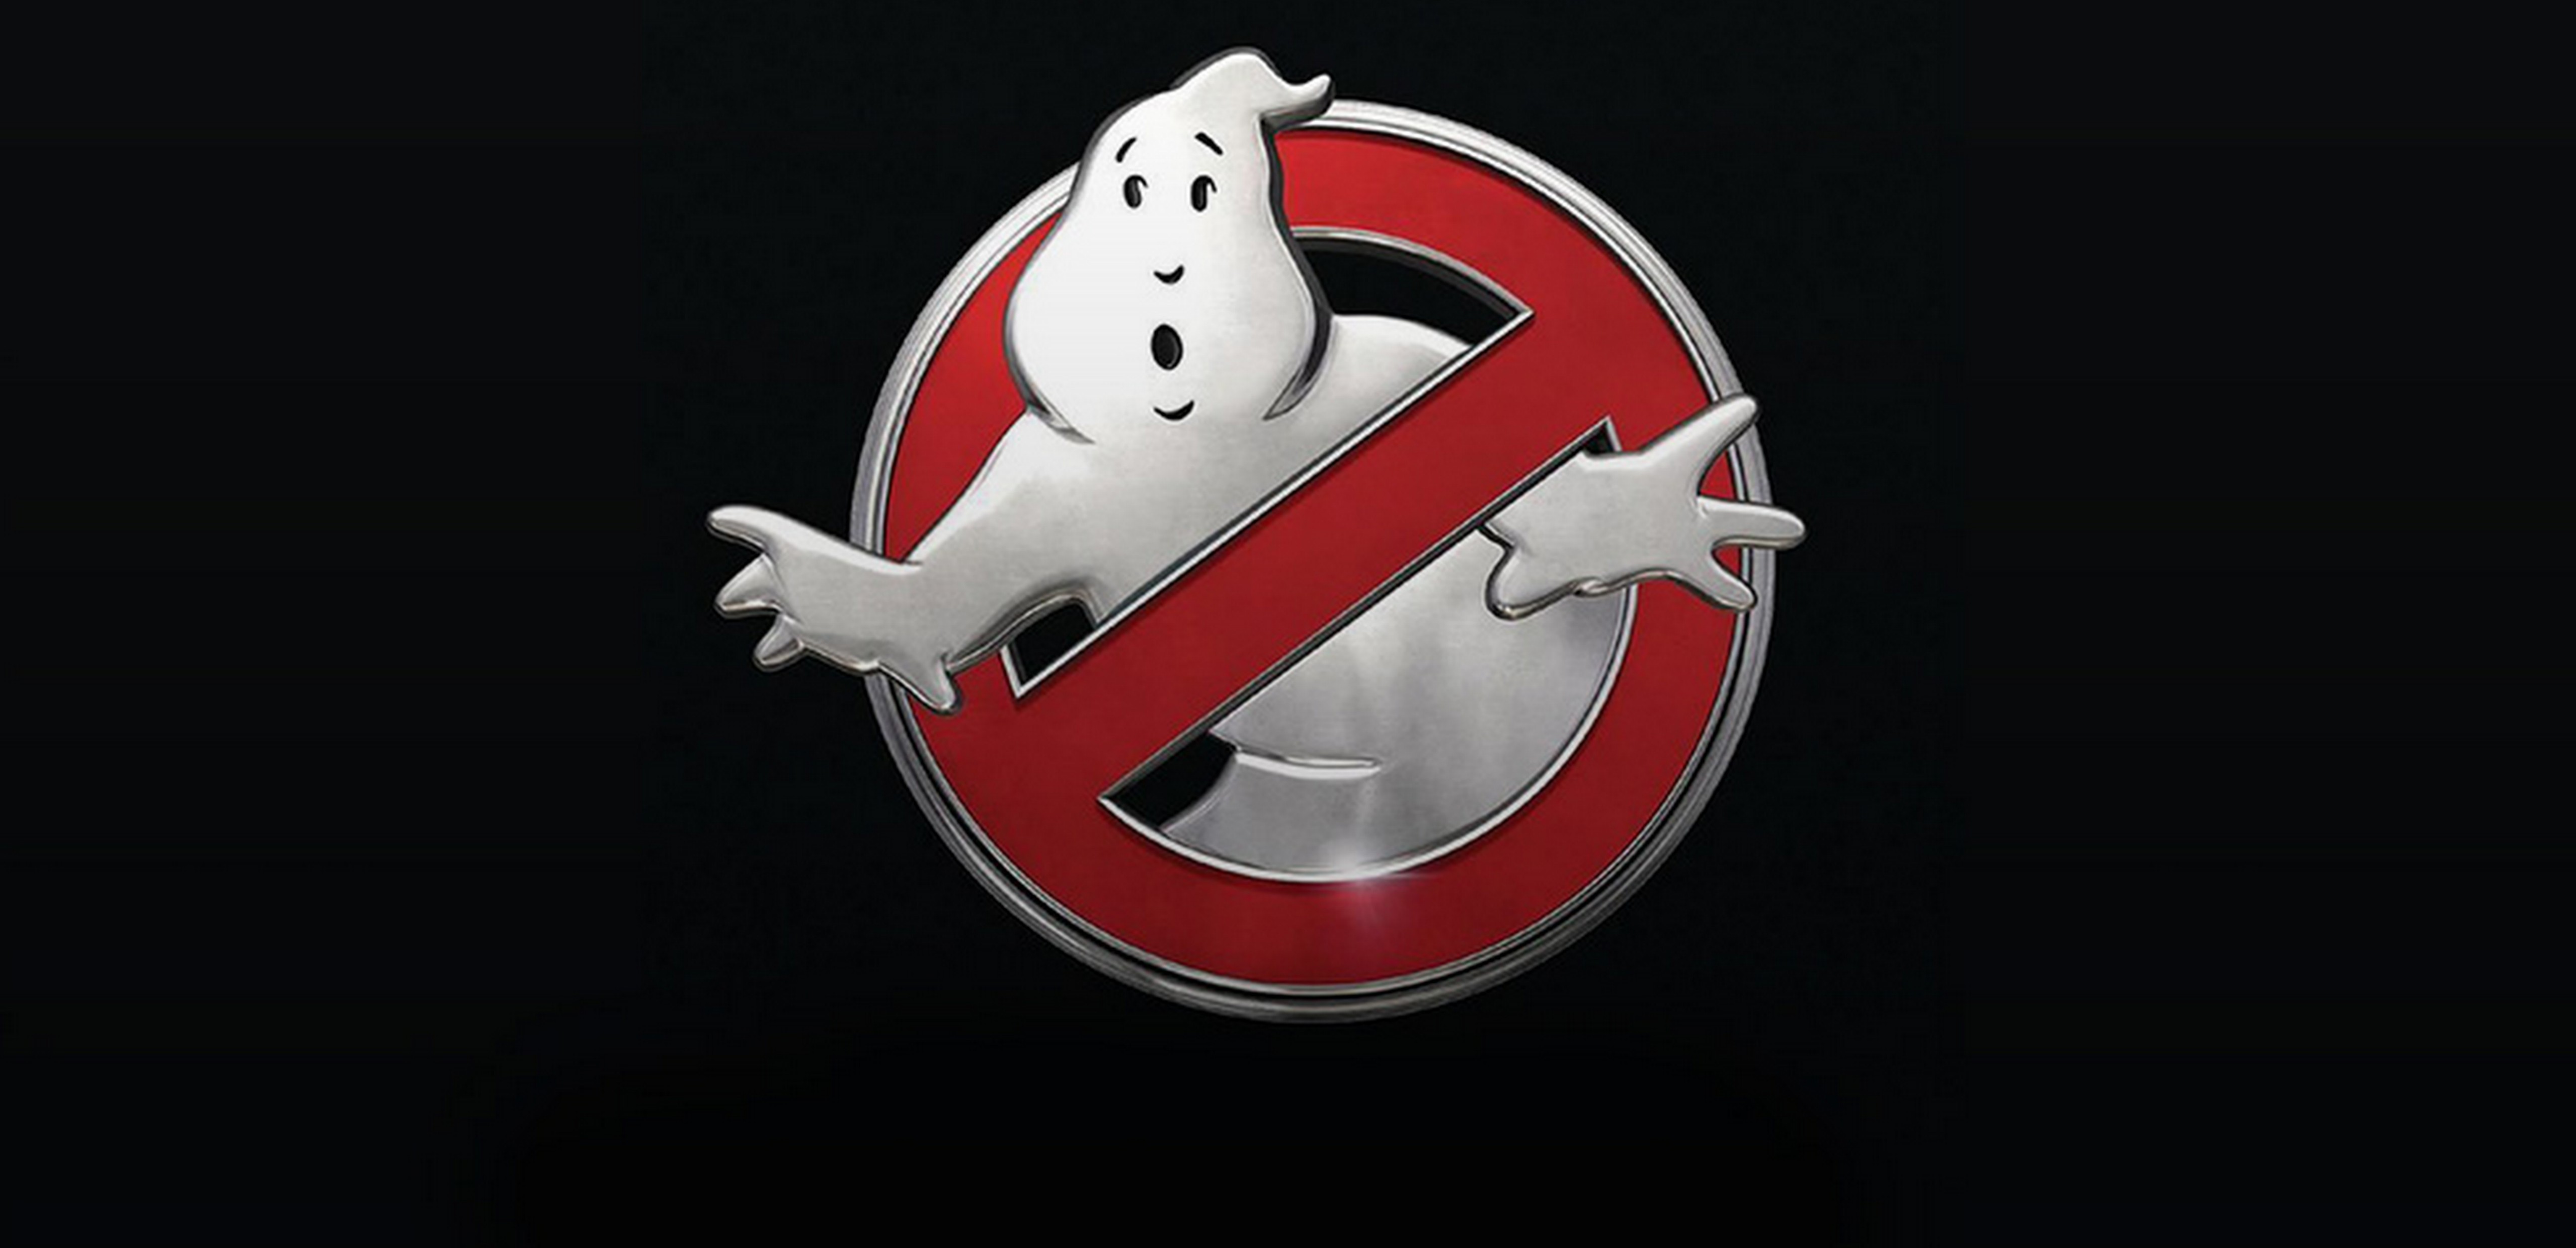 Ghostbusters Soundtrack in the Windows Store